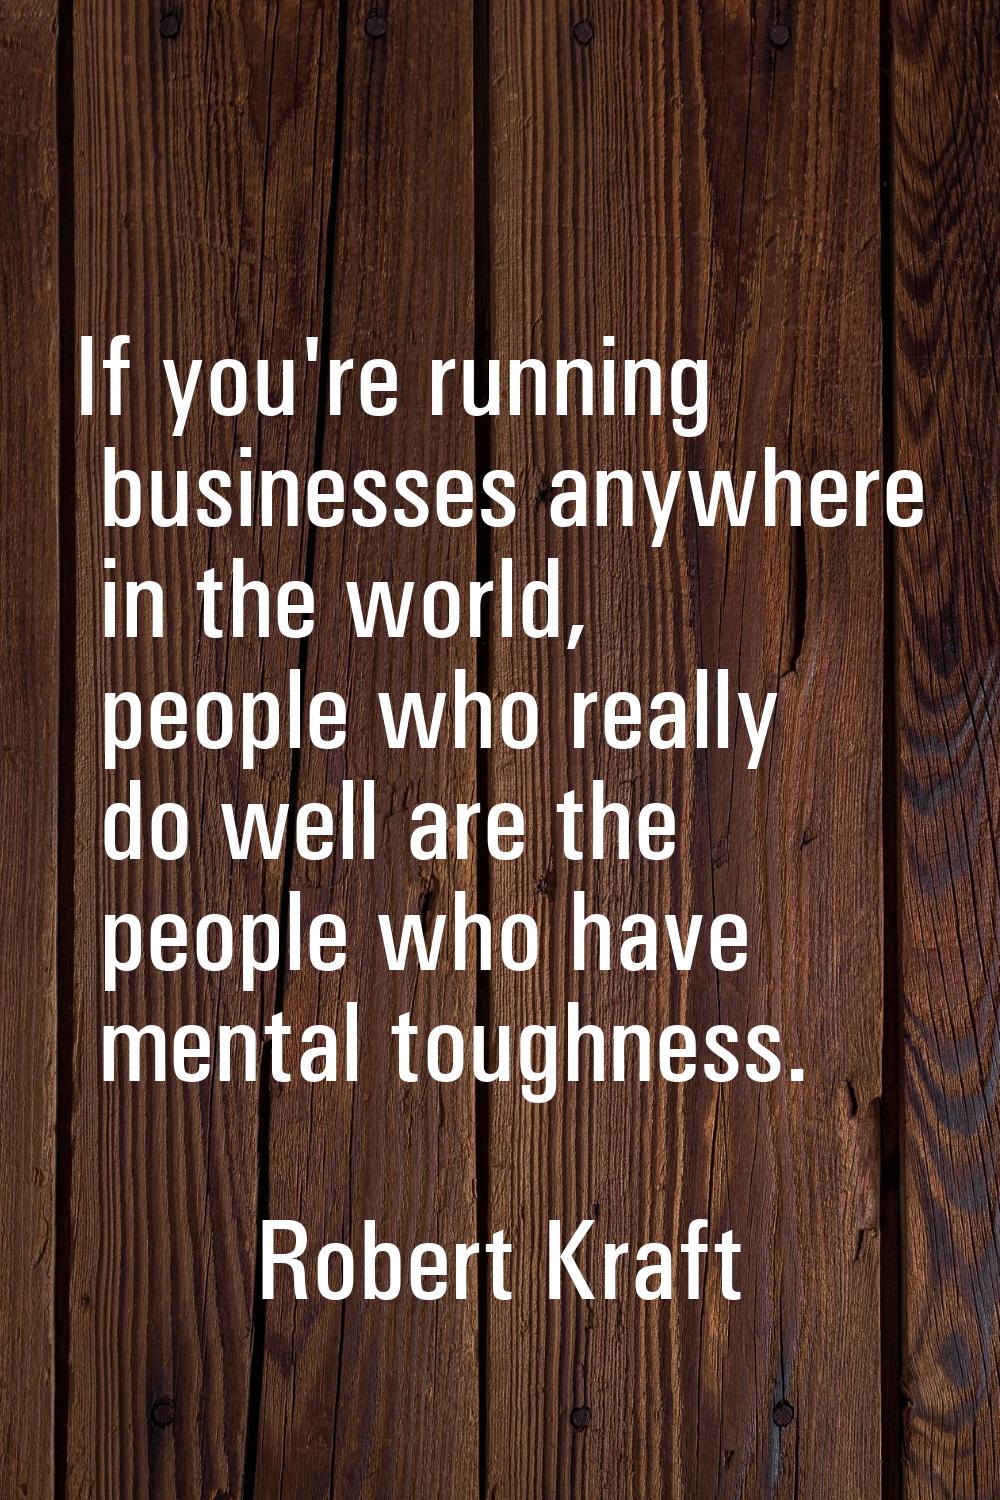 If you're running businesses anywhere in the world, people who really do well are the people who ha